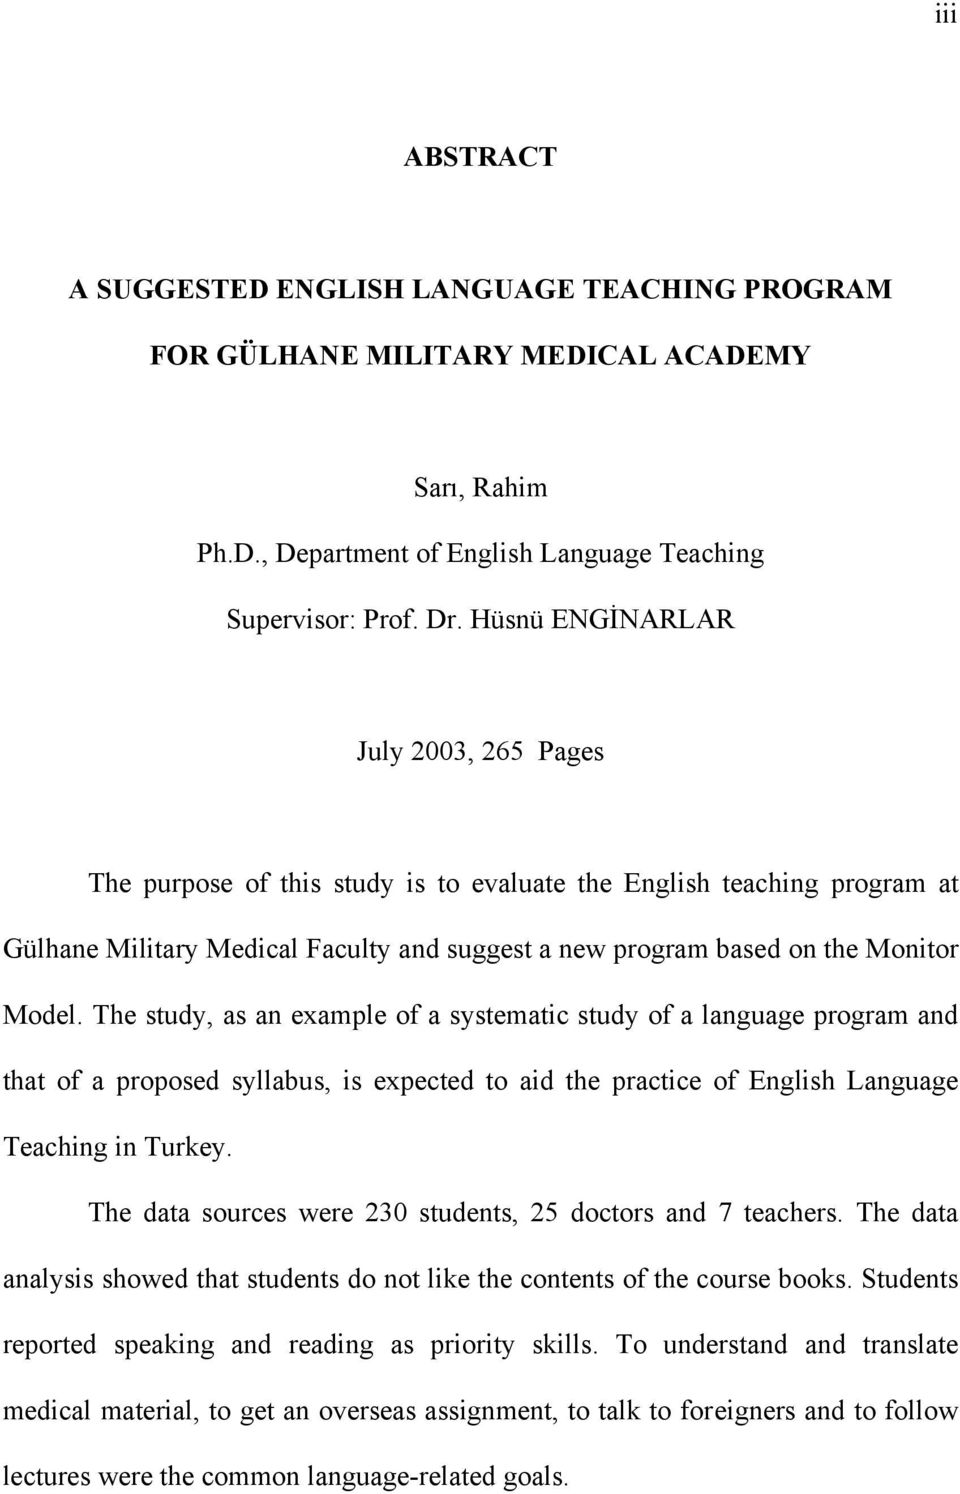 The study, as an example of a systematic study of a language program and that of a proposed syllabus, is expected to aid the practice of English Language Teaching in Turkey.